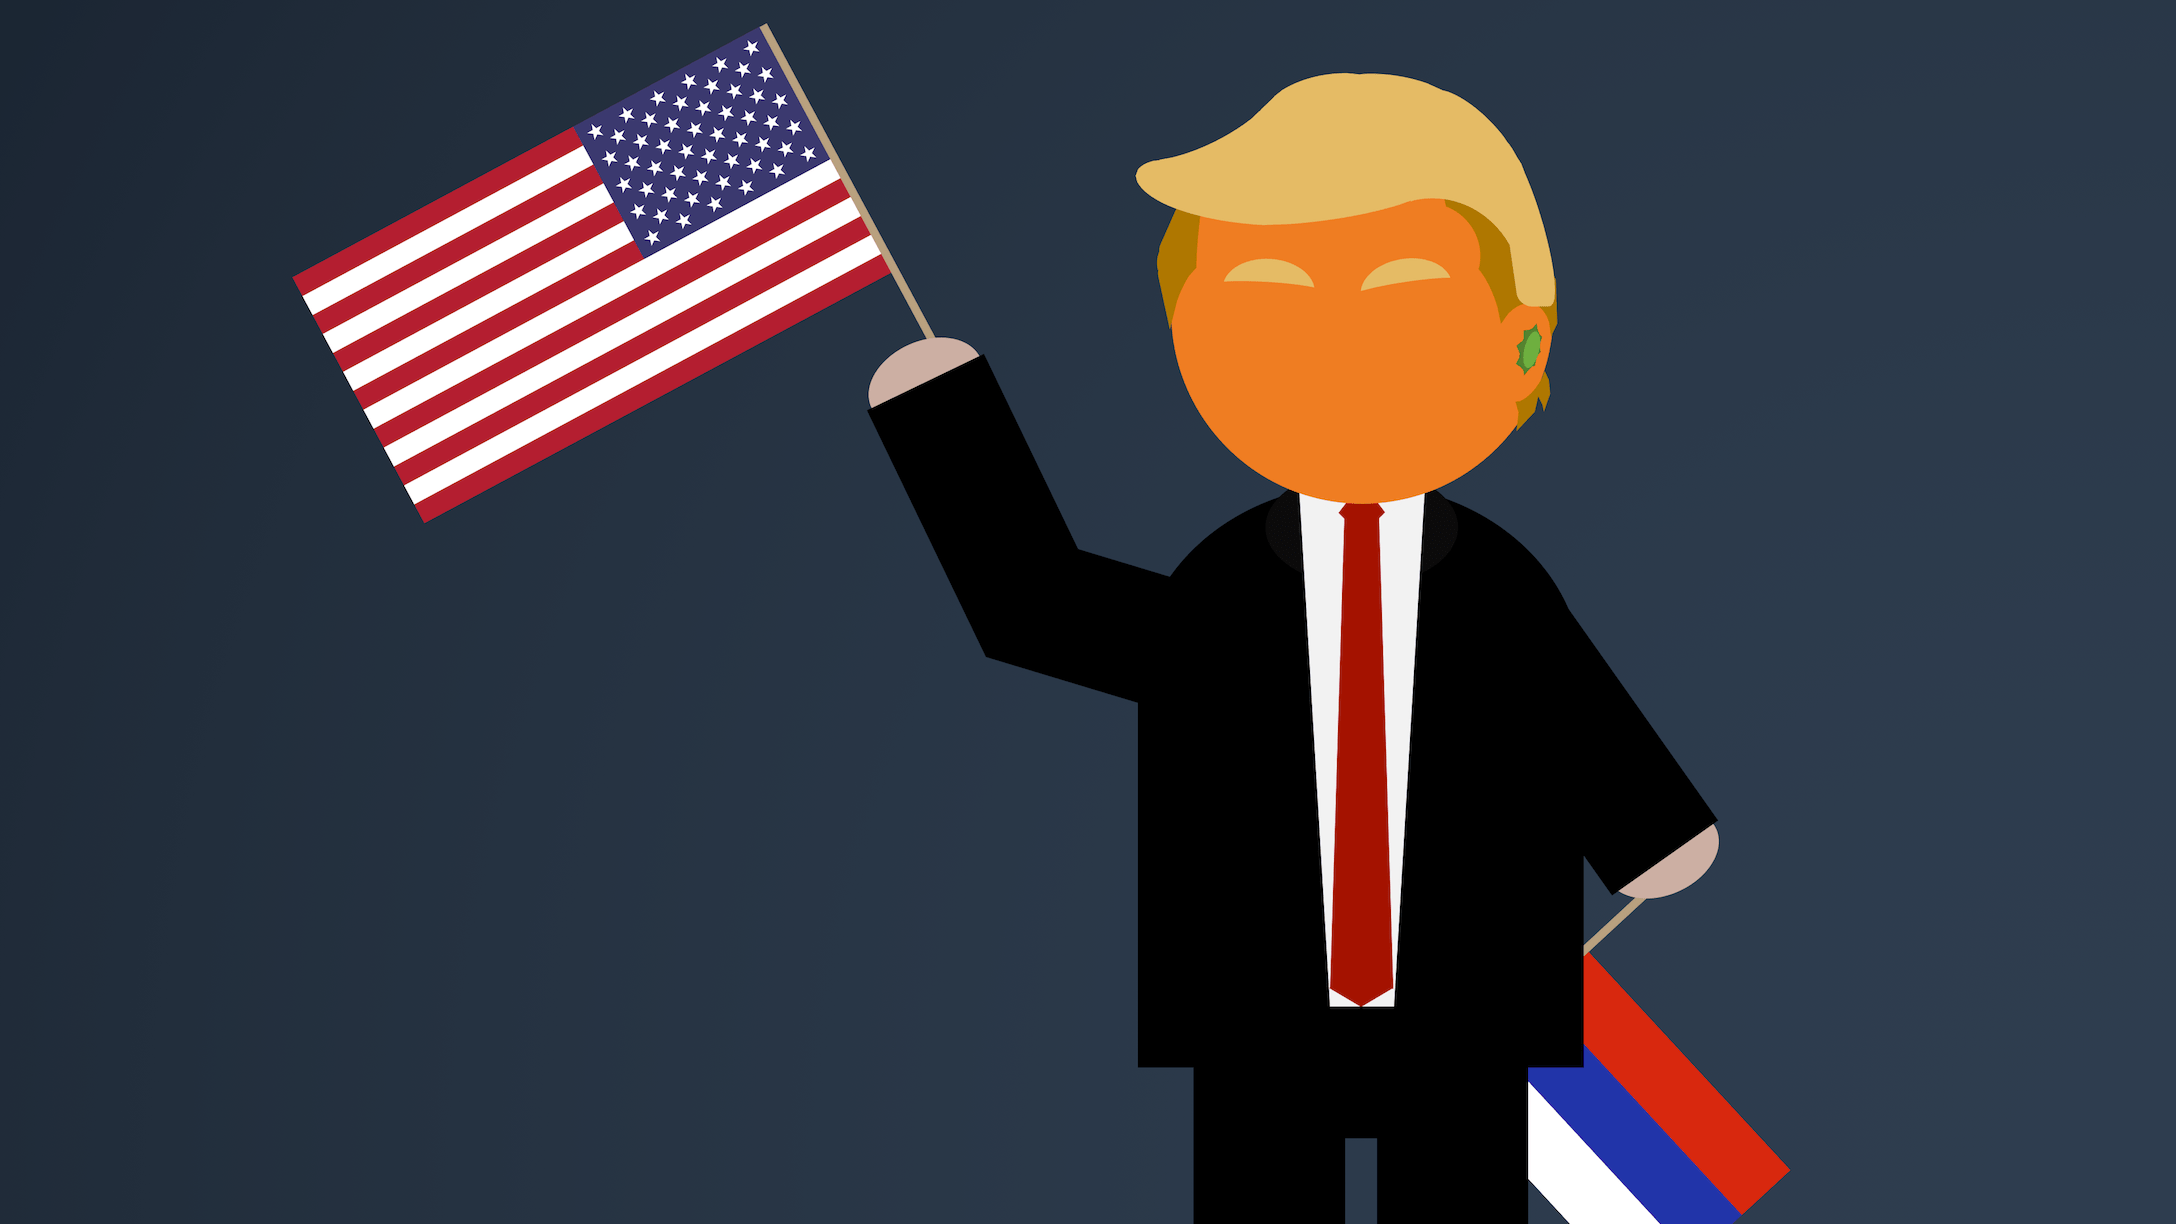 An orange president waves an American flag, while also holding a Russian one